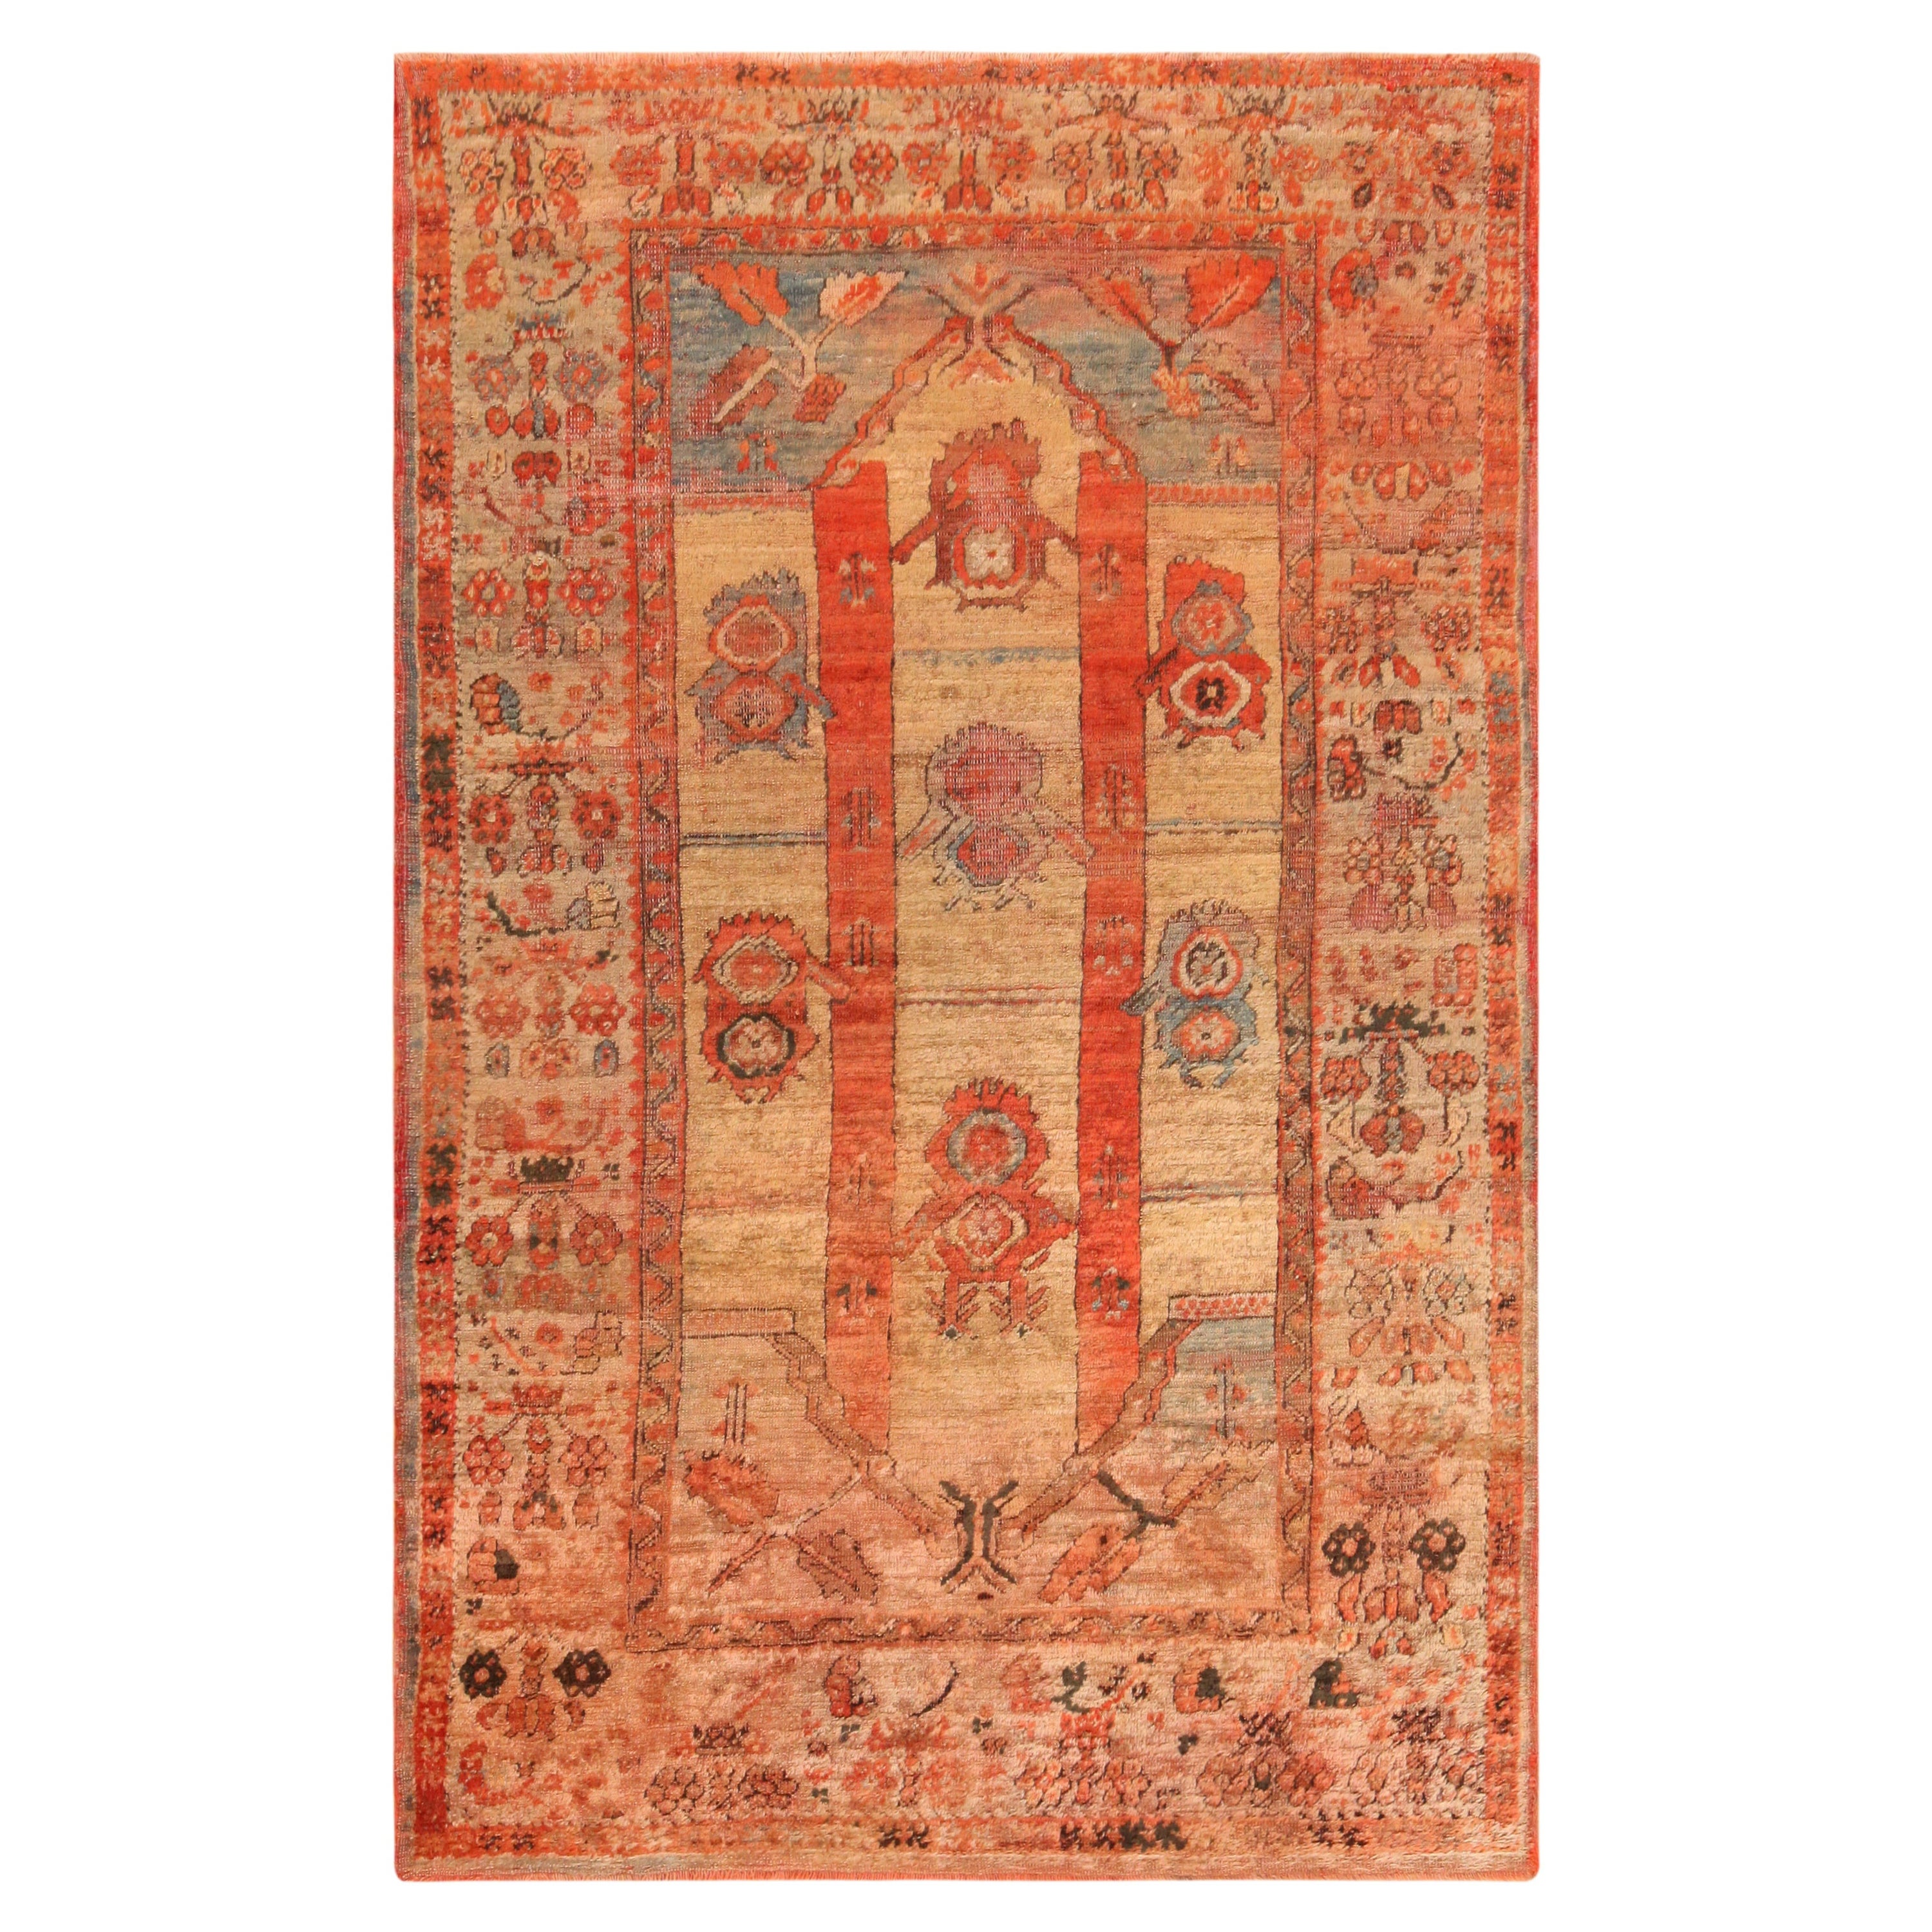 Nazmiyal Collection Antique Turkish Angora Oushak Rug. 4 ft 2 in x 6 ft 9 in 